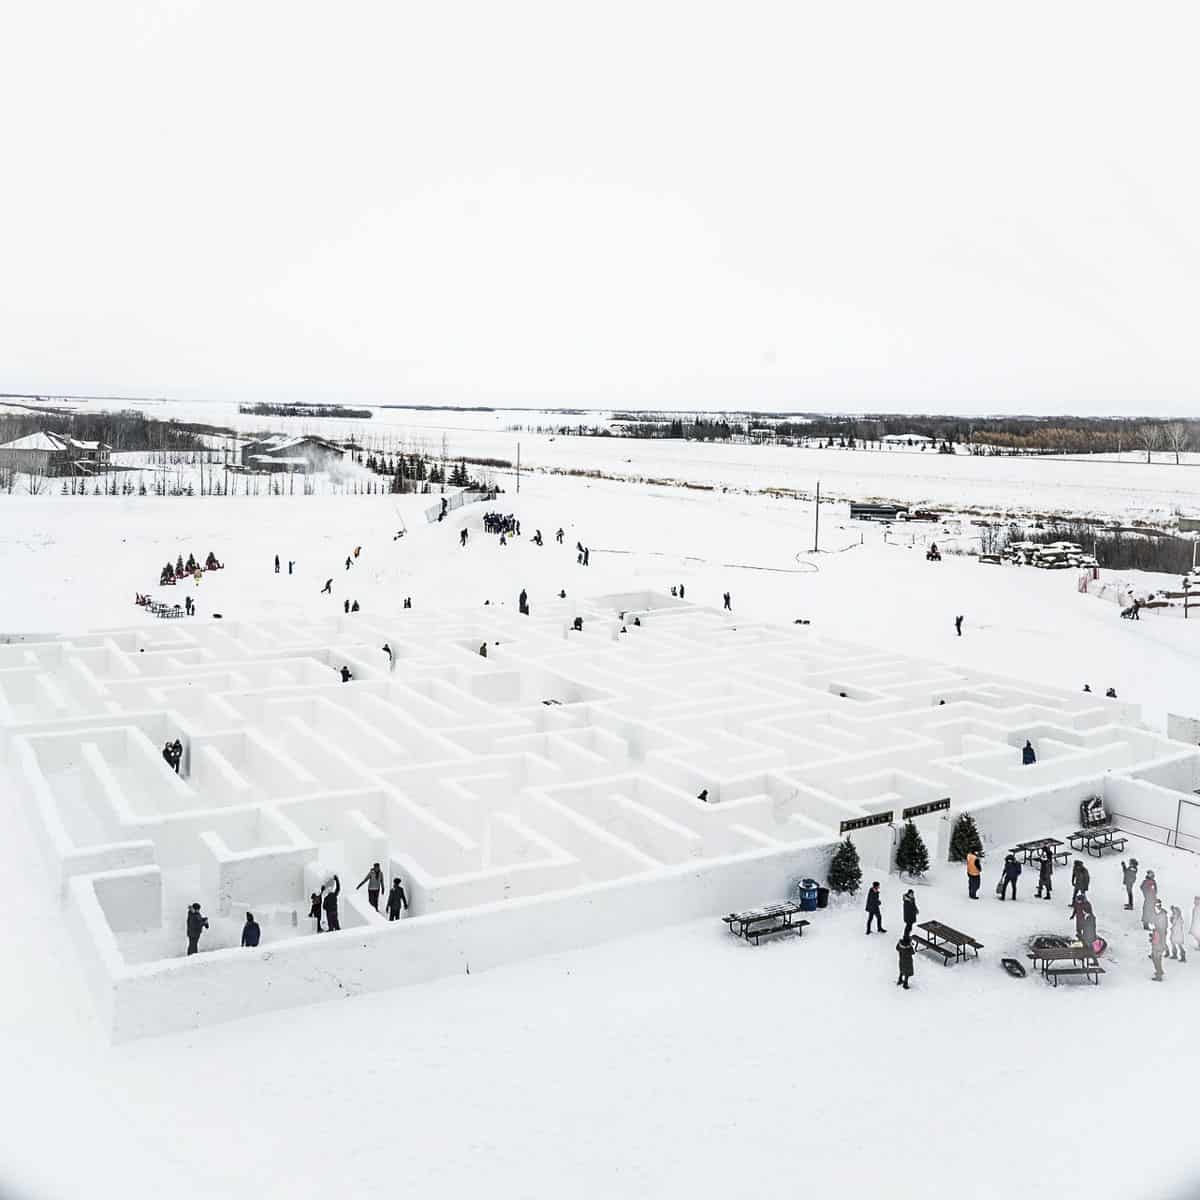 A distant view of a snow maze